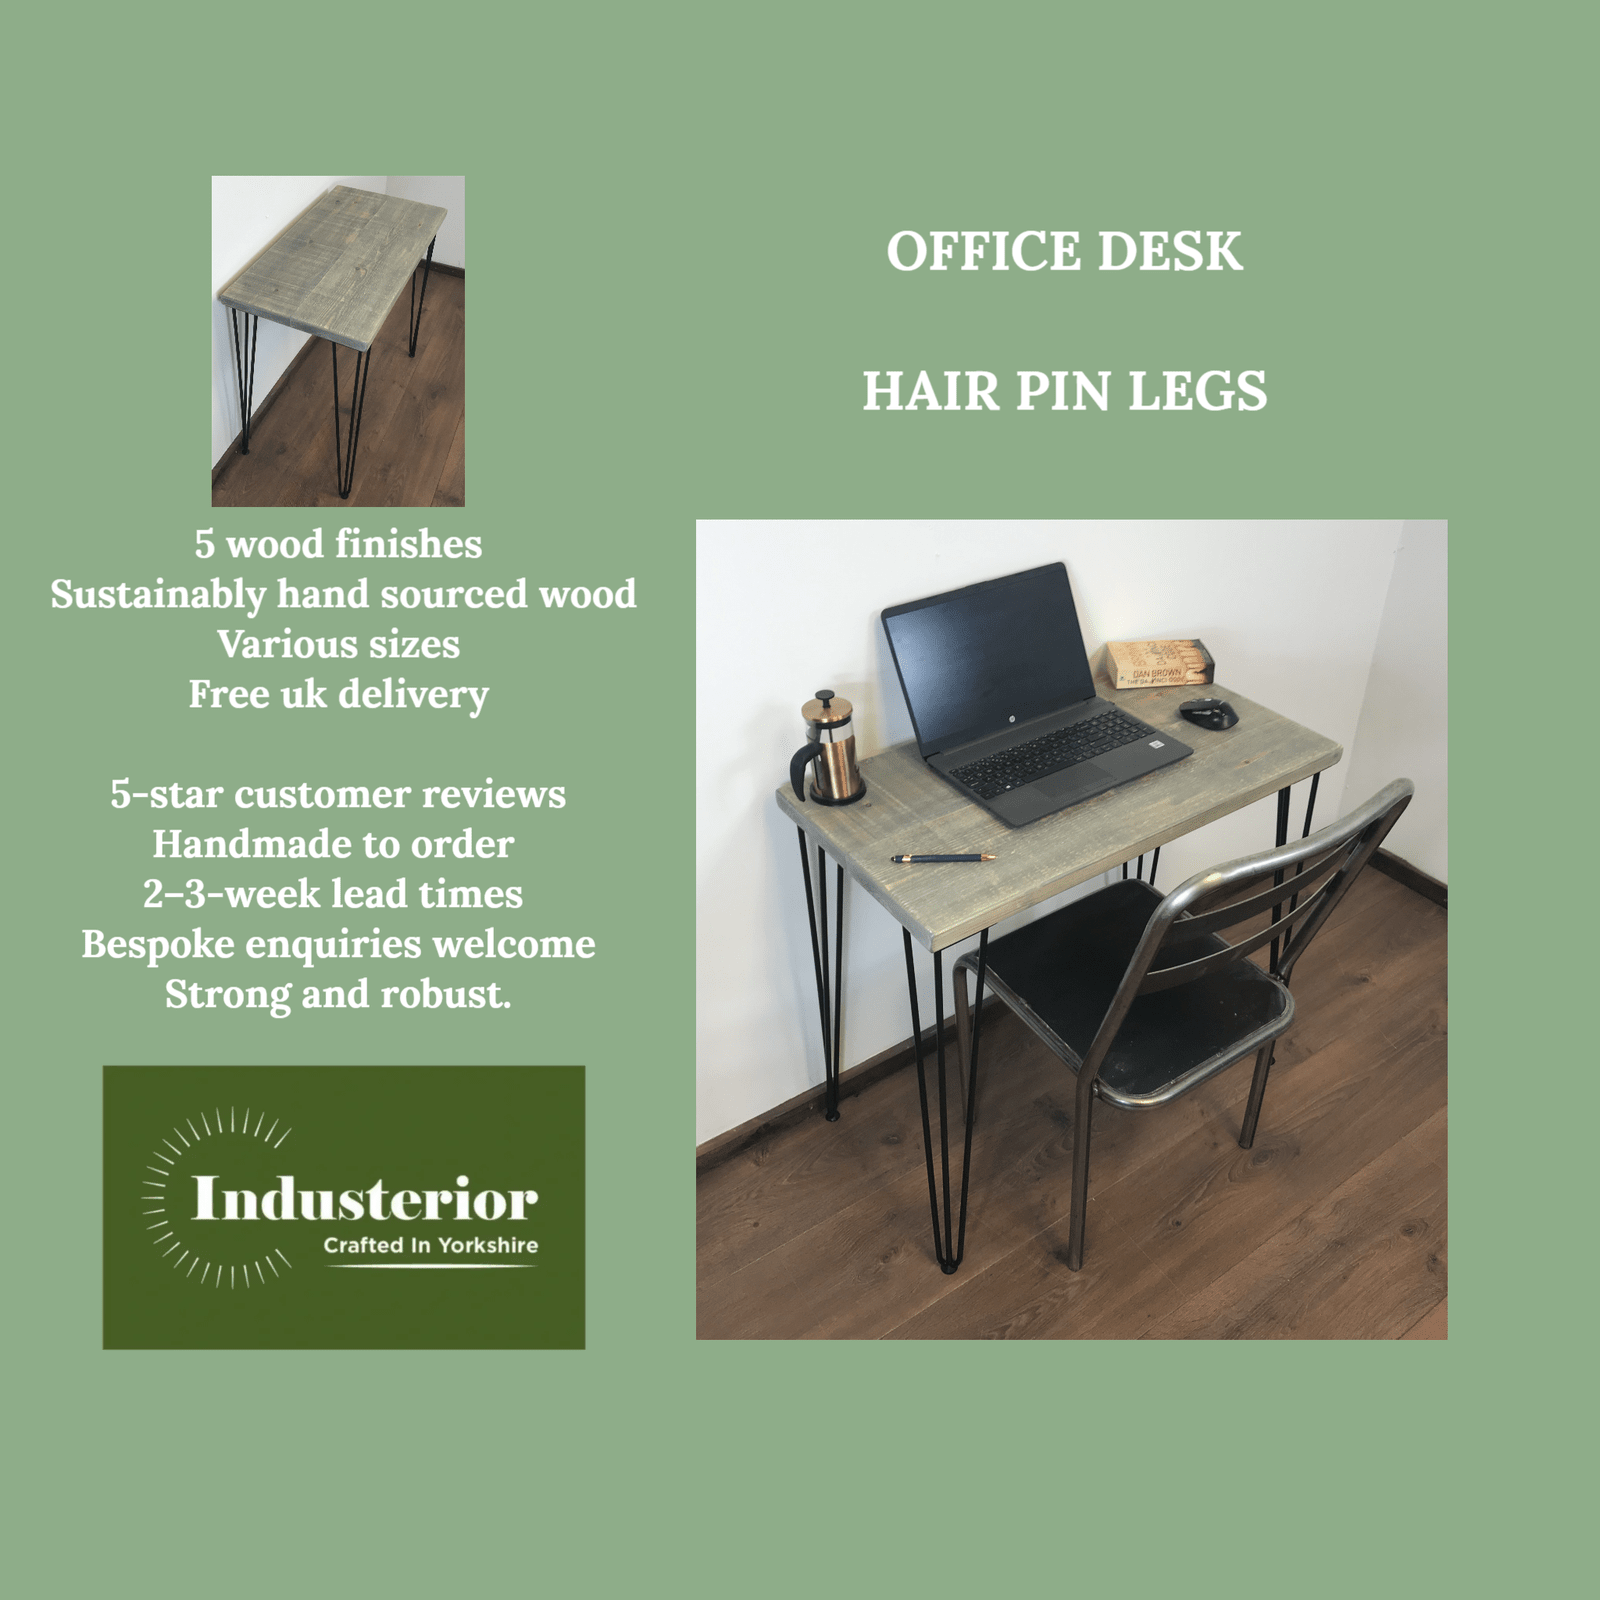 Small Rustic office Desk with hair pin legs- 5 choices of wood finish - Industrial style - solid wood office desk - sustainable timber.